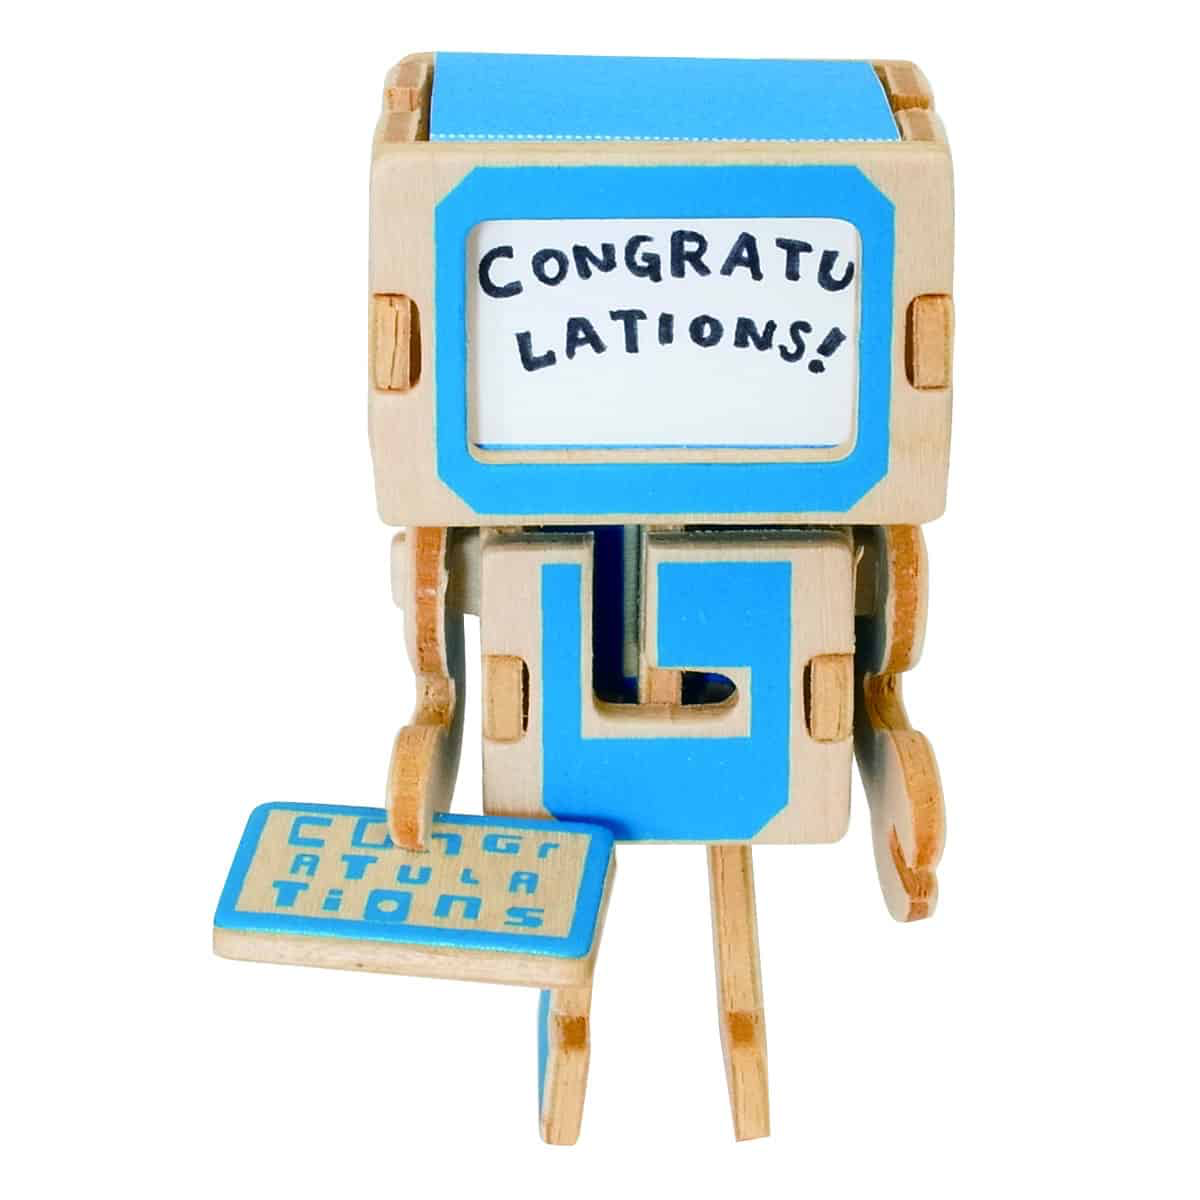 Back version of “PLAY-DECO Wooden Greeting Card” saying Congratulations.